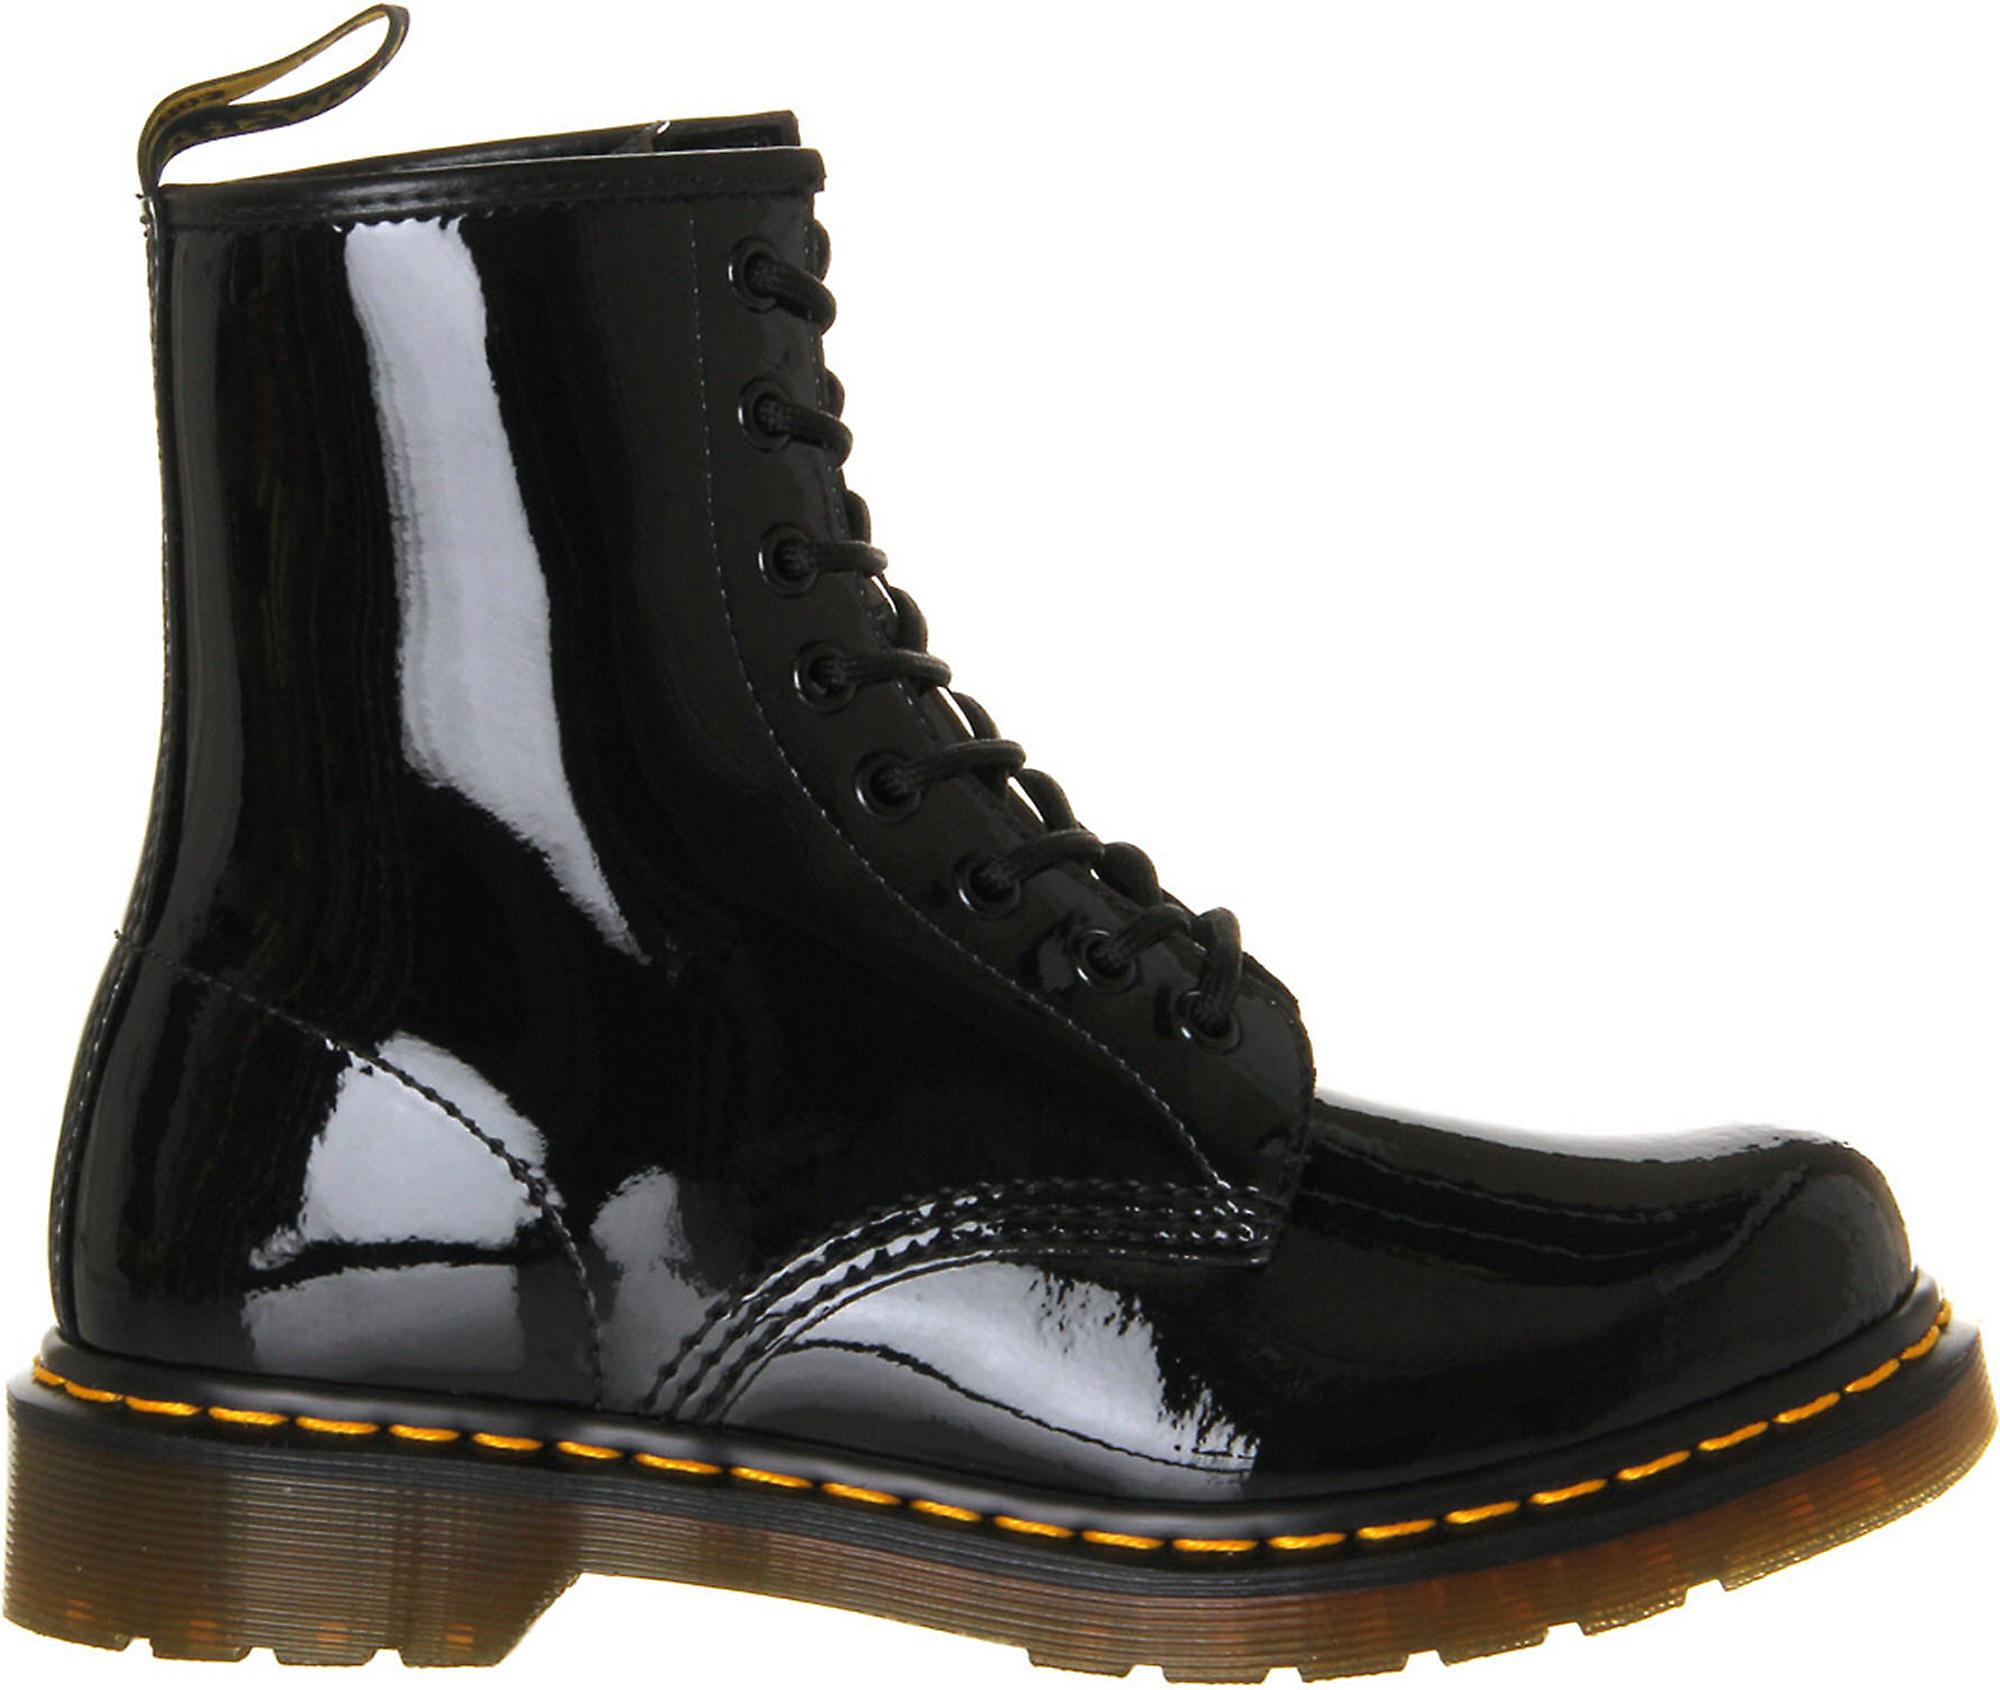 Dr. Martens 1460 8-eye Patent Leather Boots in Black Patent (Black) for ...